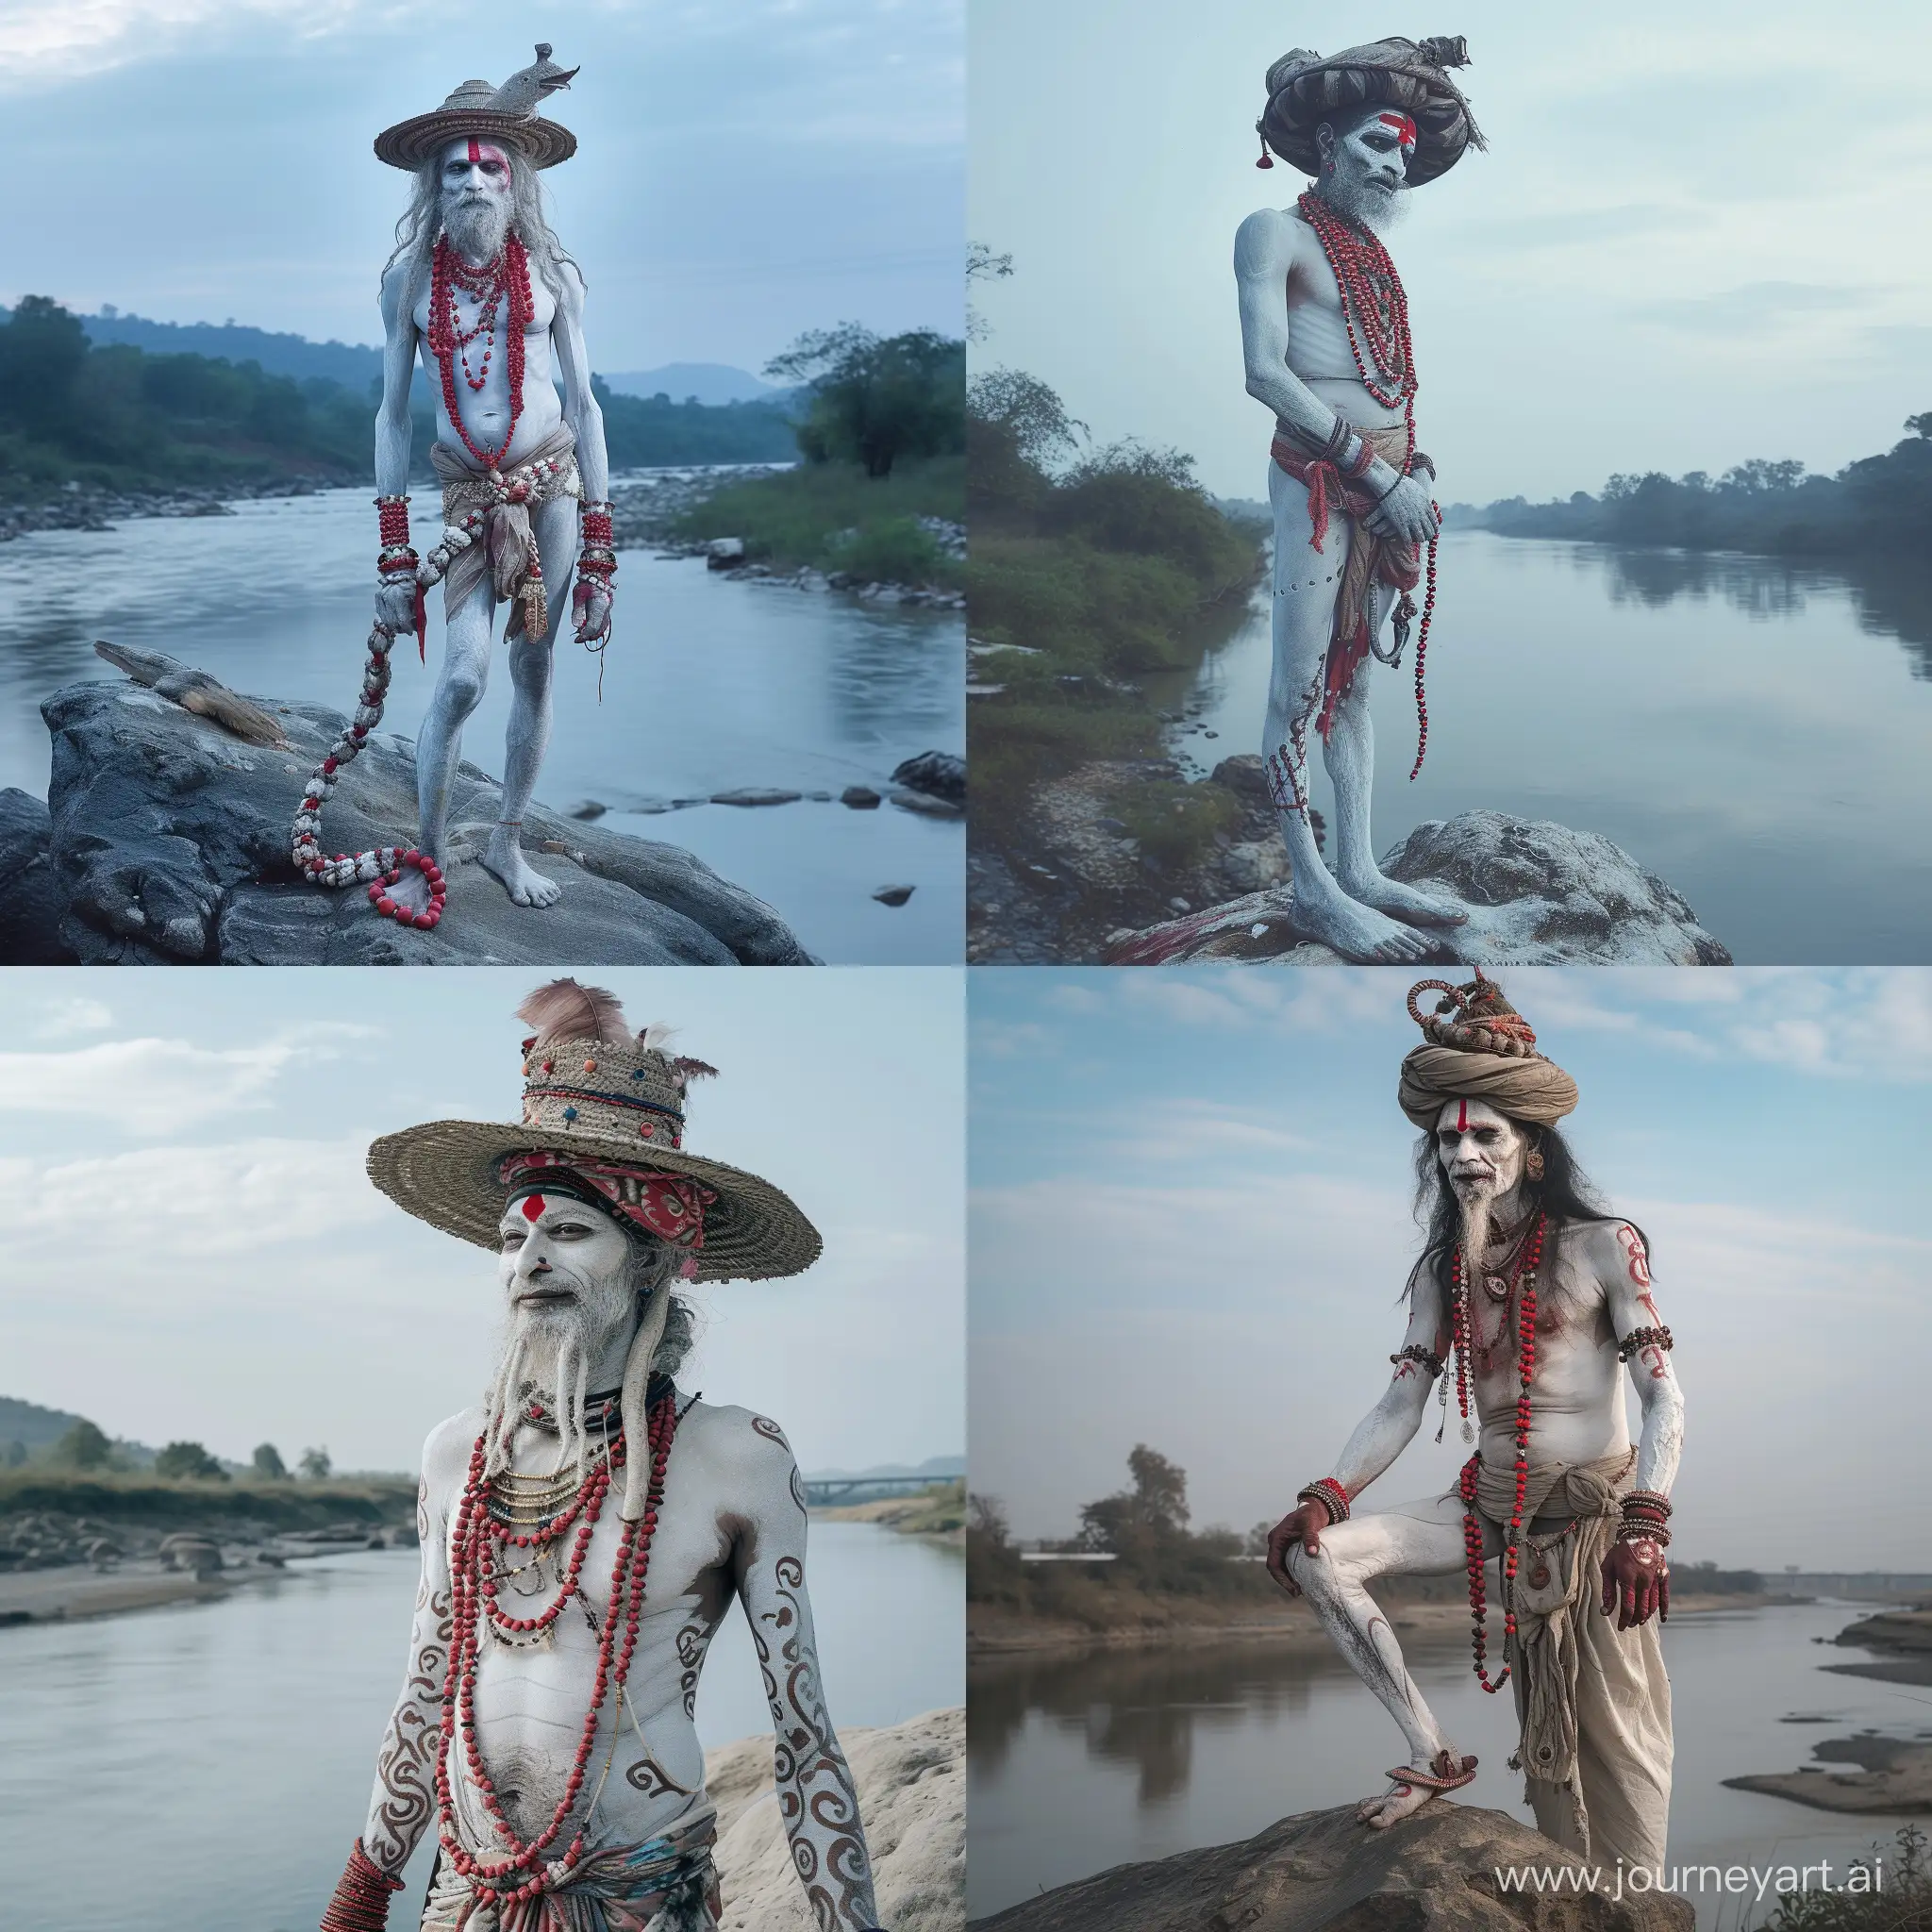 naga sadhu  white painted skin whit red beads and a old hat with beads  totaal body standing on a rock by river low contrast soft light  bleu sky  50mm fujixt4  low angle